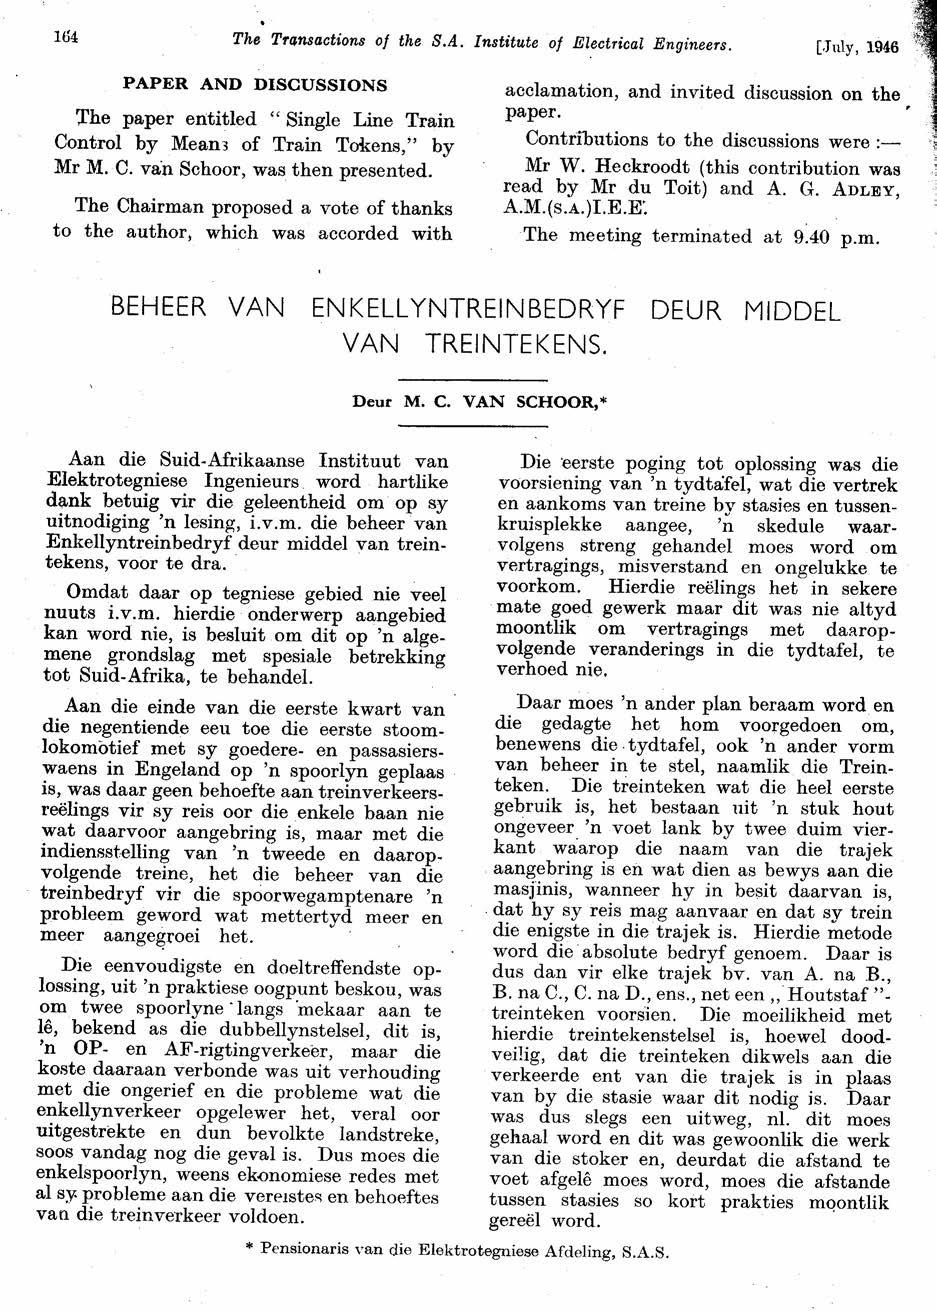 164 [July, 1946 PAPER AND DISCUSSIONS The paper entitled " Single Line Train Control by Mean3 of Train Tokens," by Mr M. C. van Schoor, was then presented.